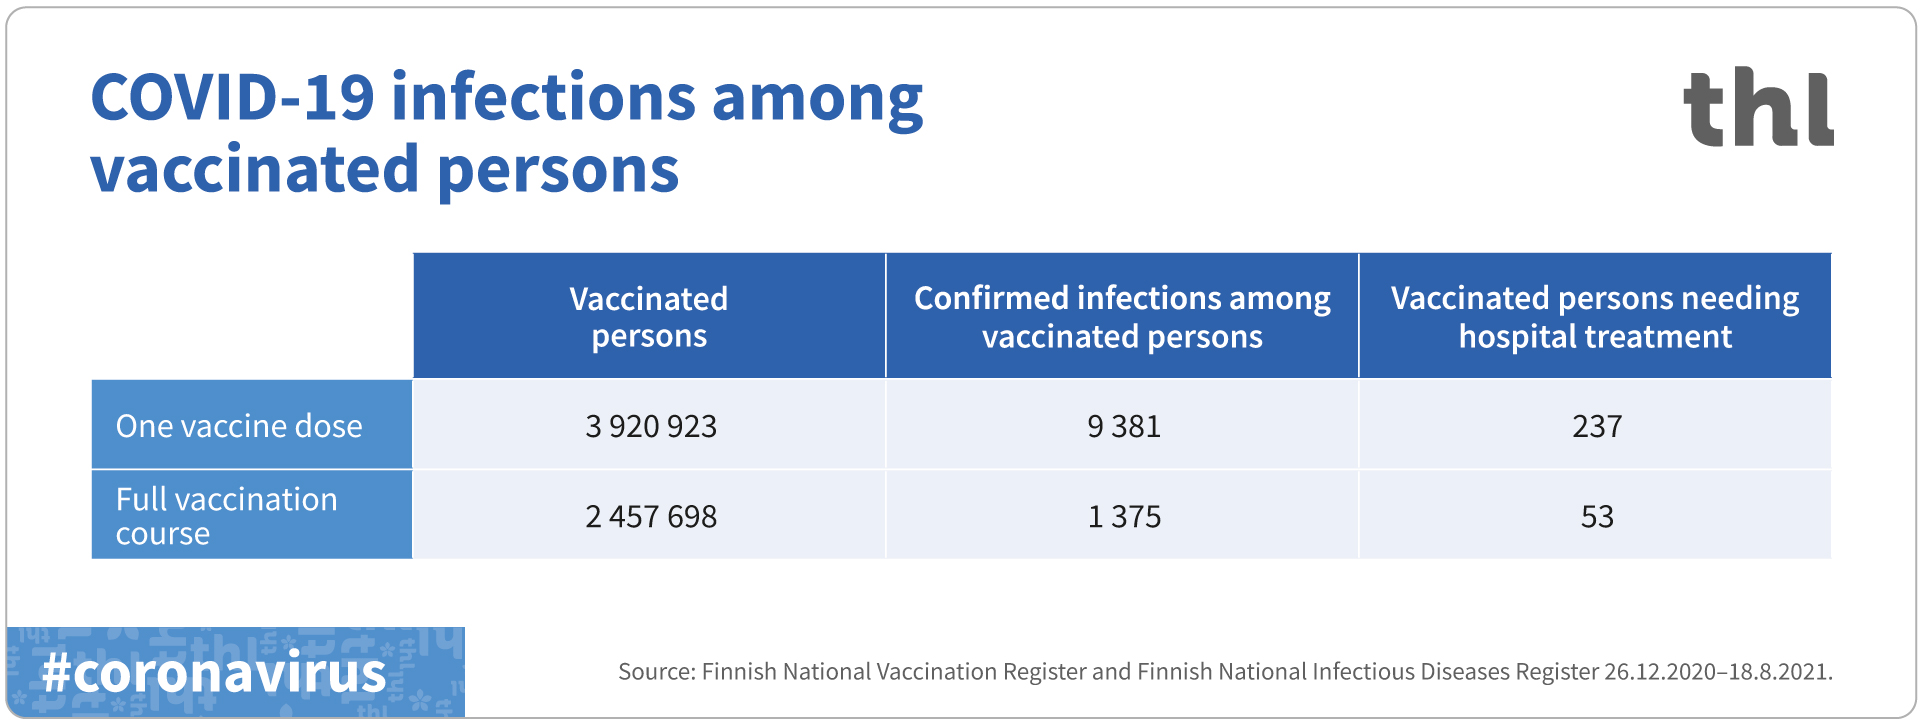 COVID-19 infections among vaccinated persons